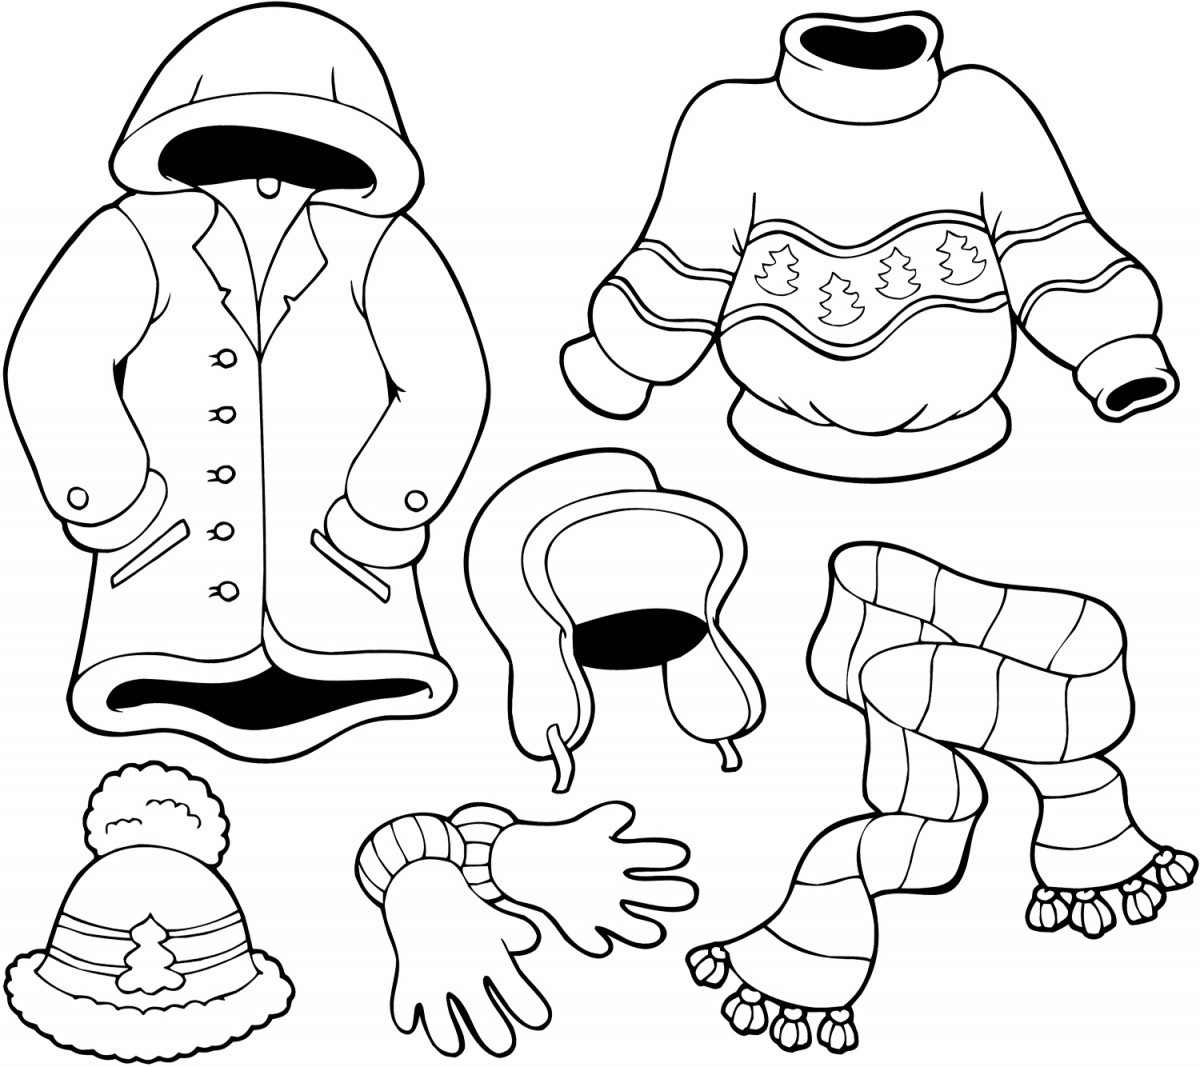 Winter Coloring Pages For Preschool
 Winter Season Coloring Pages